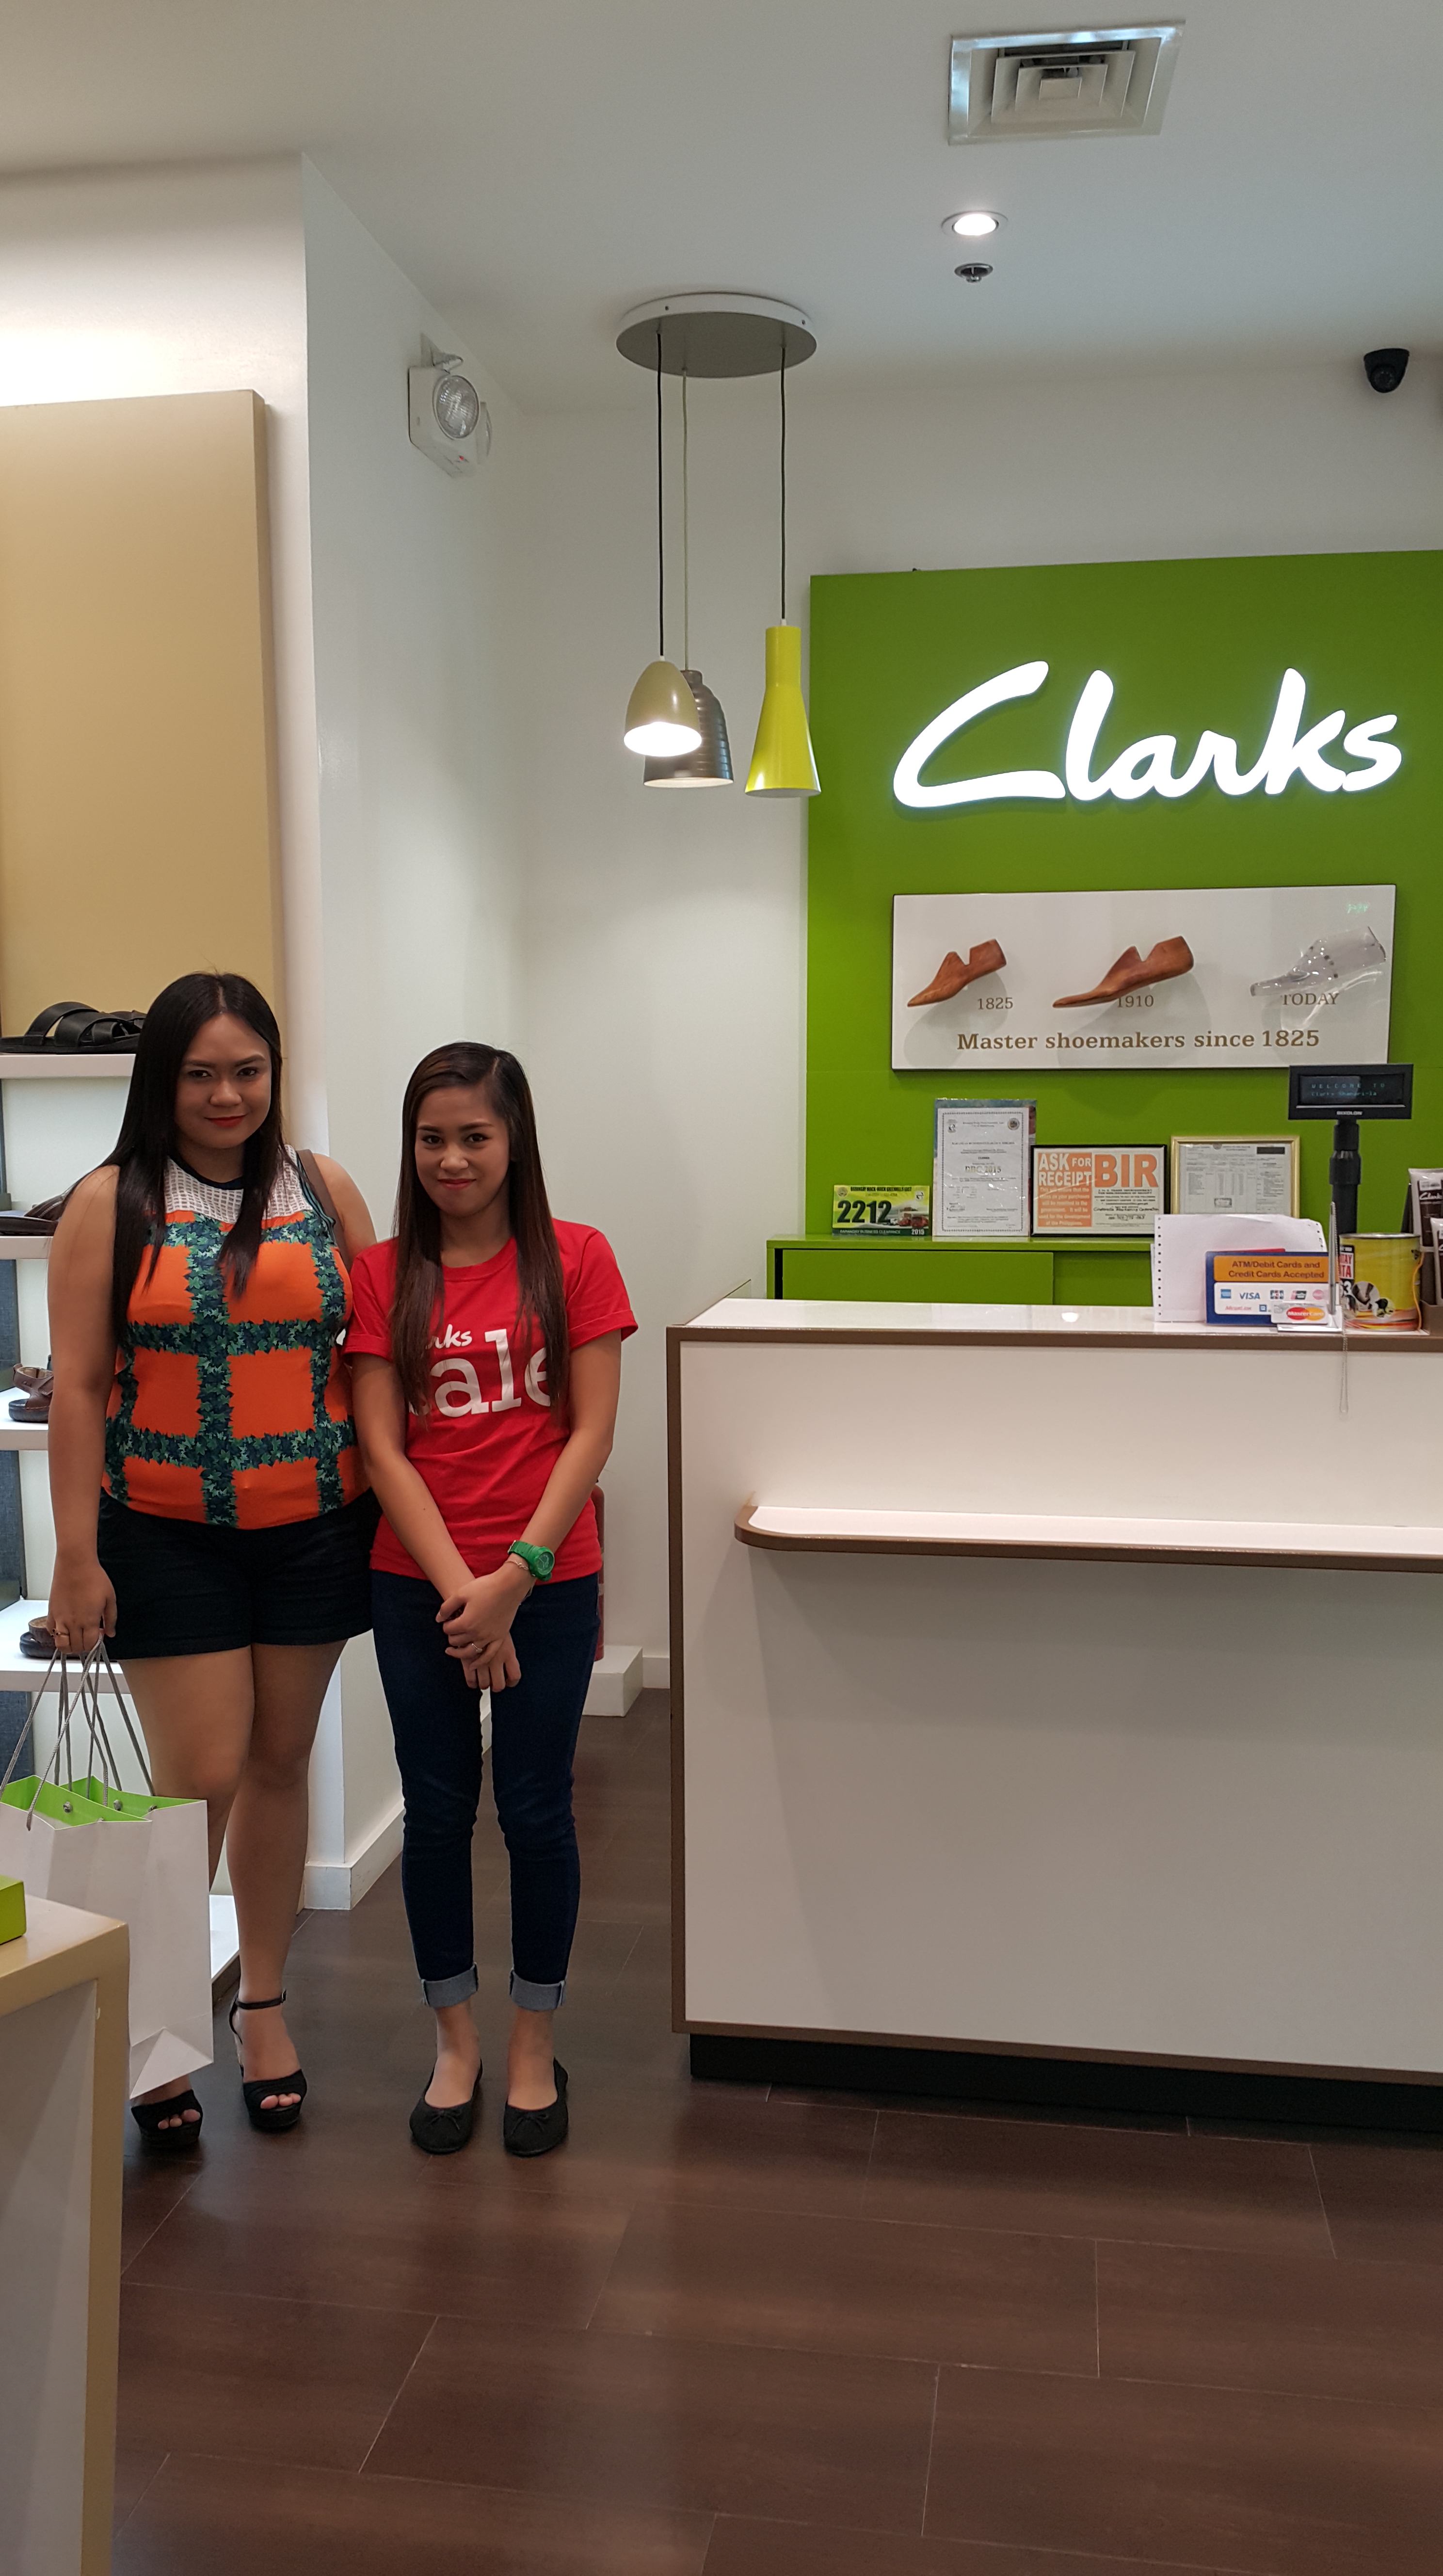 clarks mega mall off 64% - online-sms.in